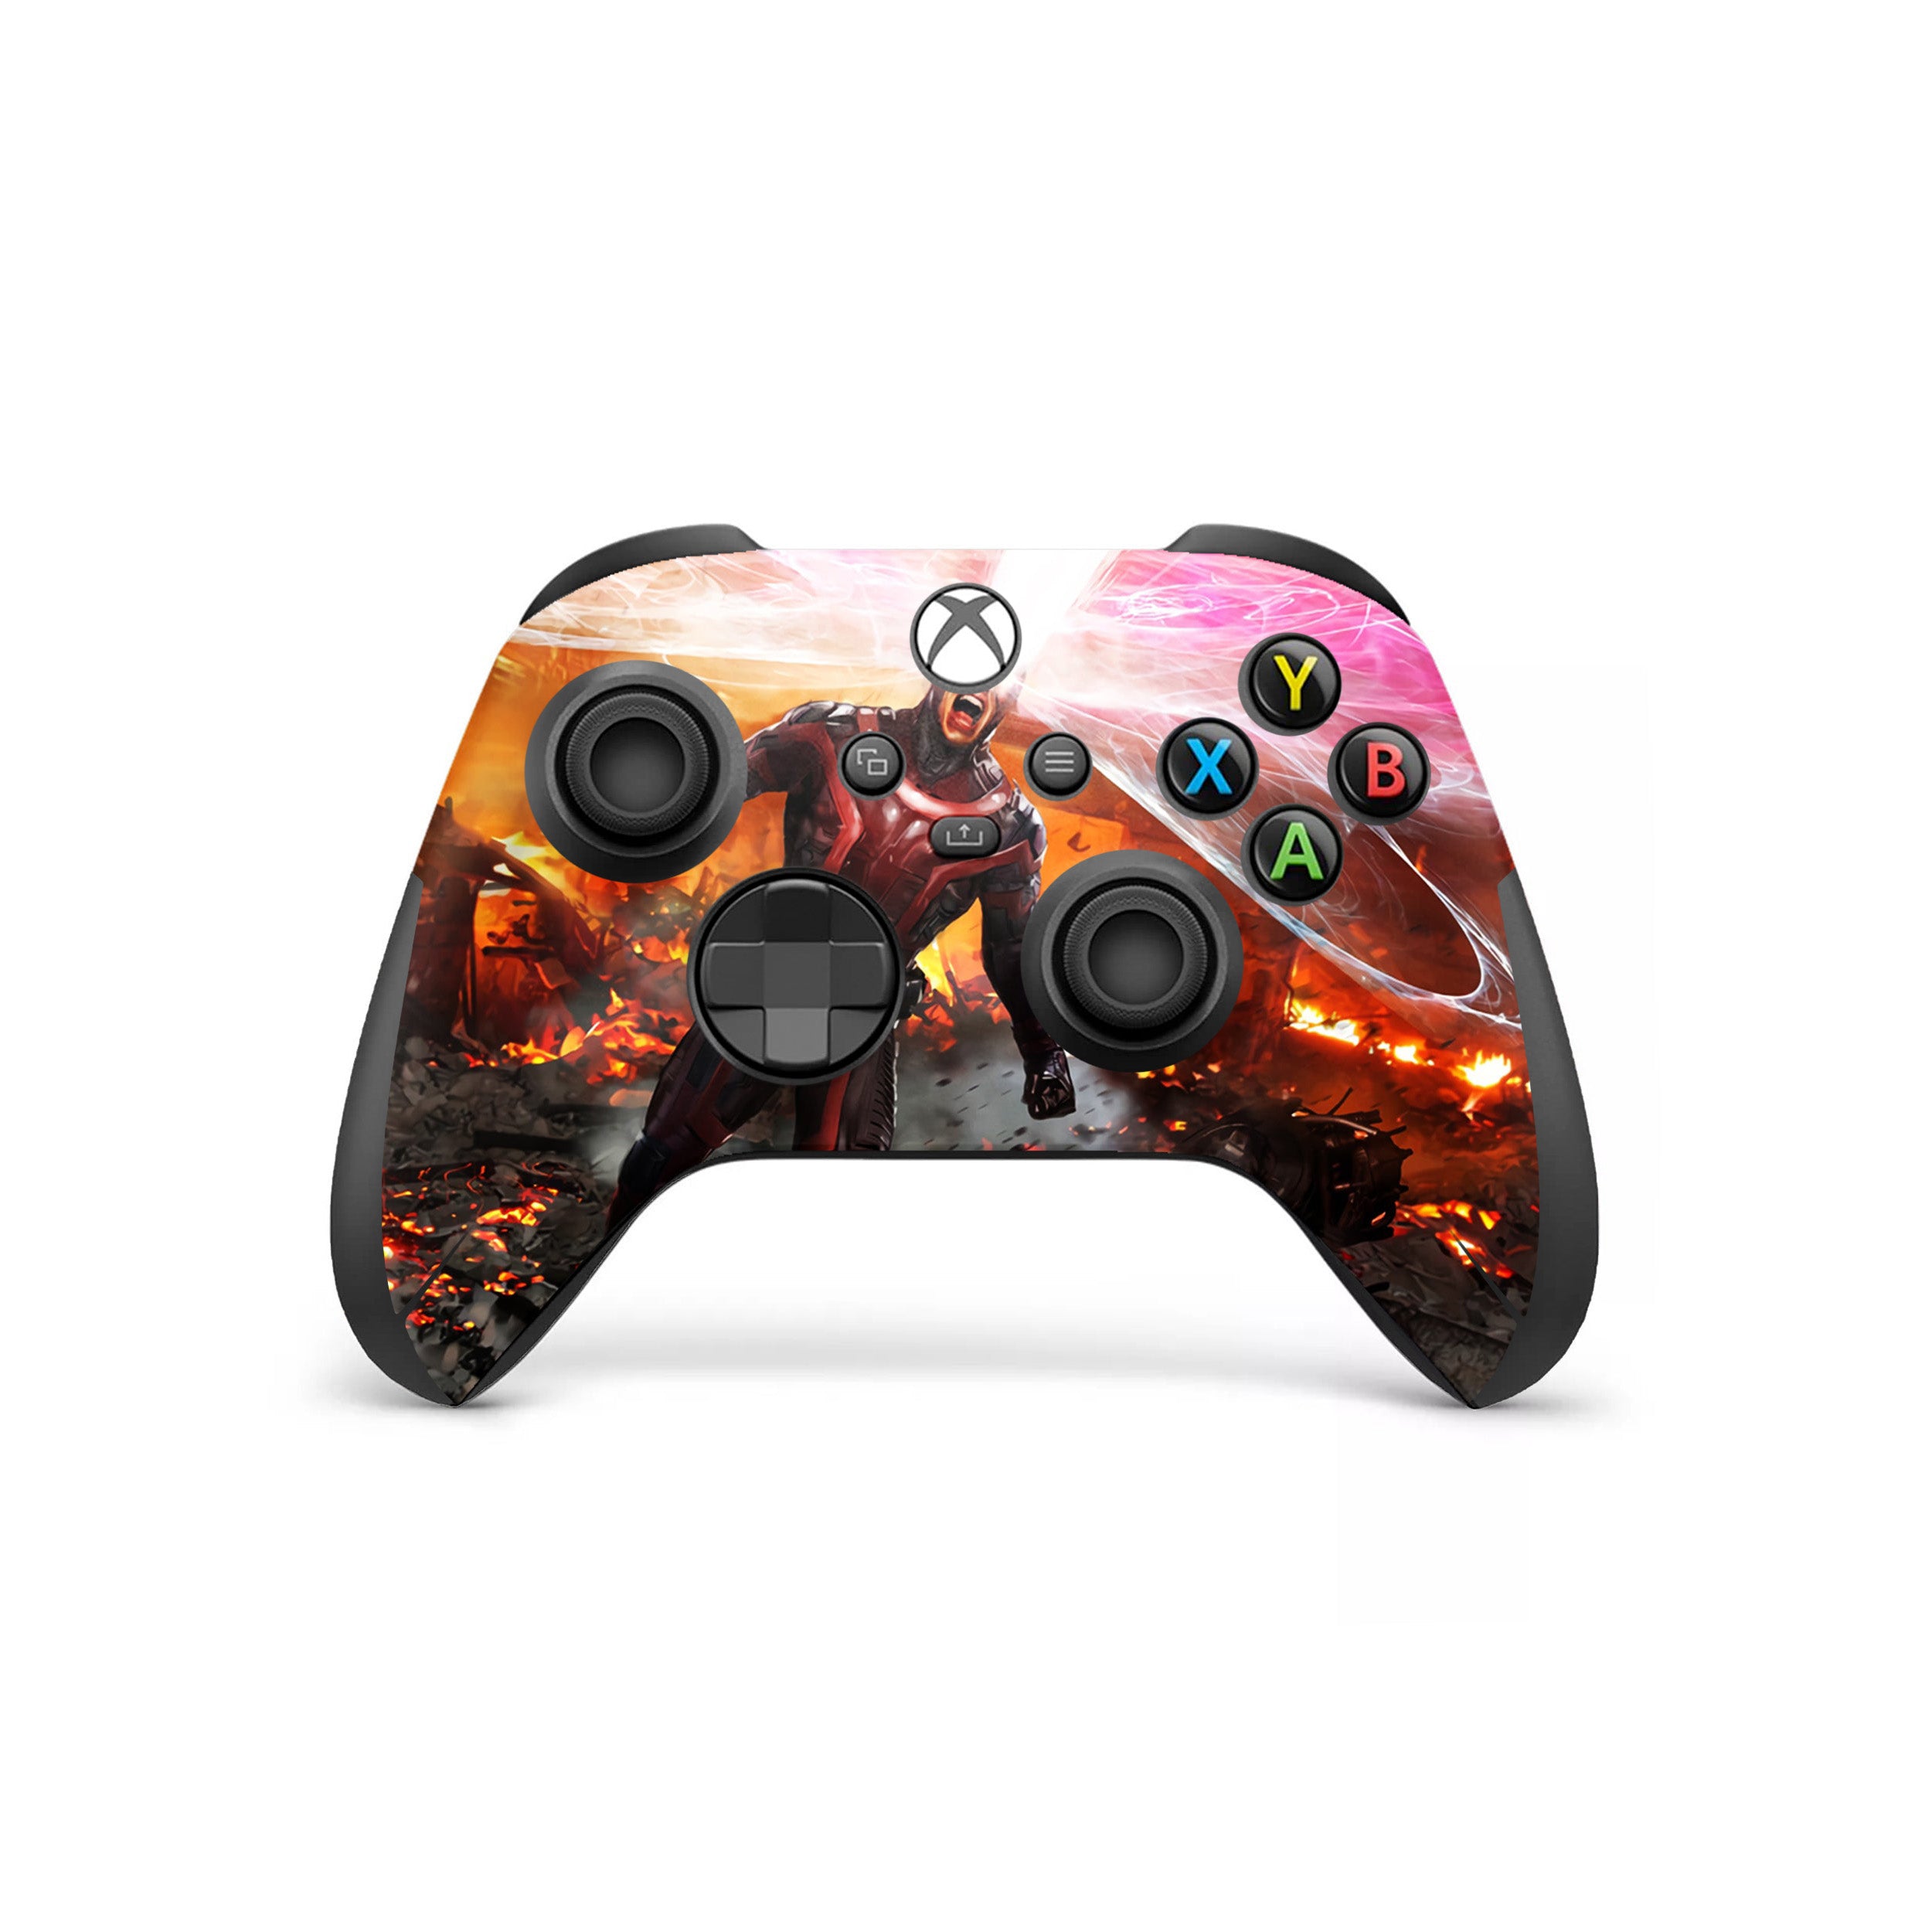 A video game skin featuring a Marvel X Men Cyclops design for the Xbox Wireless Controller.